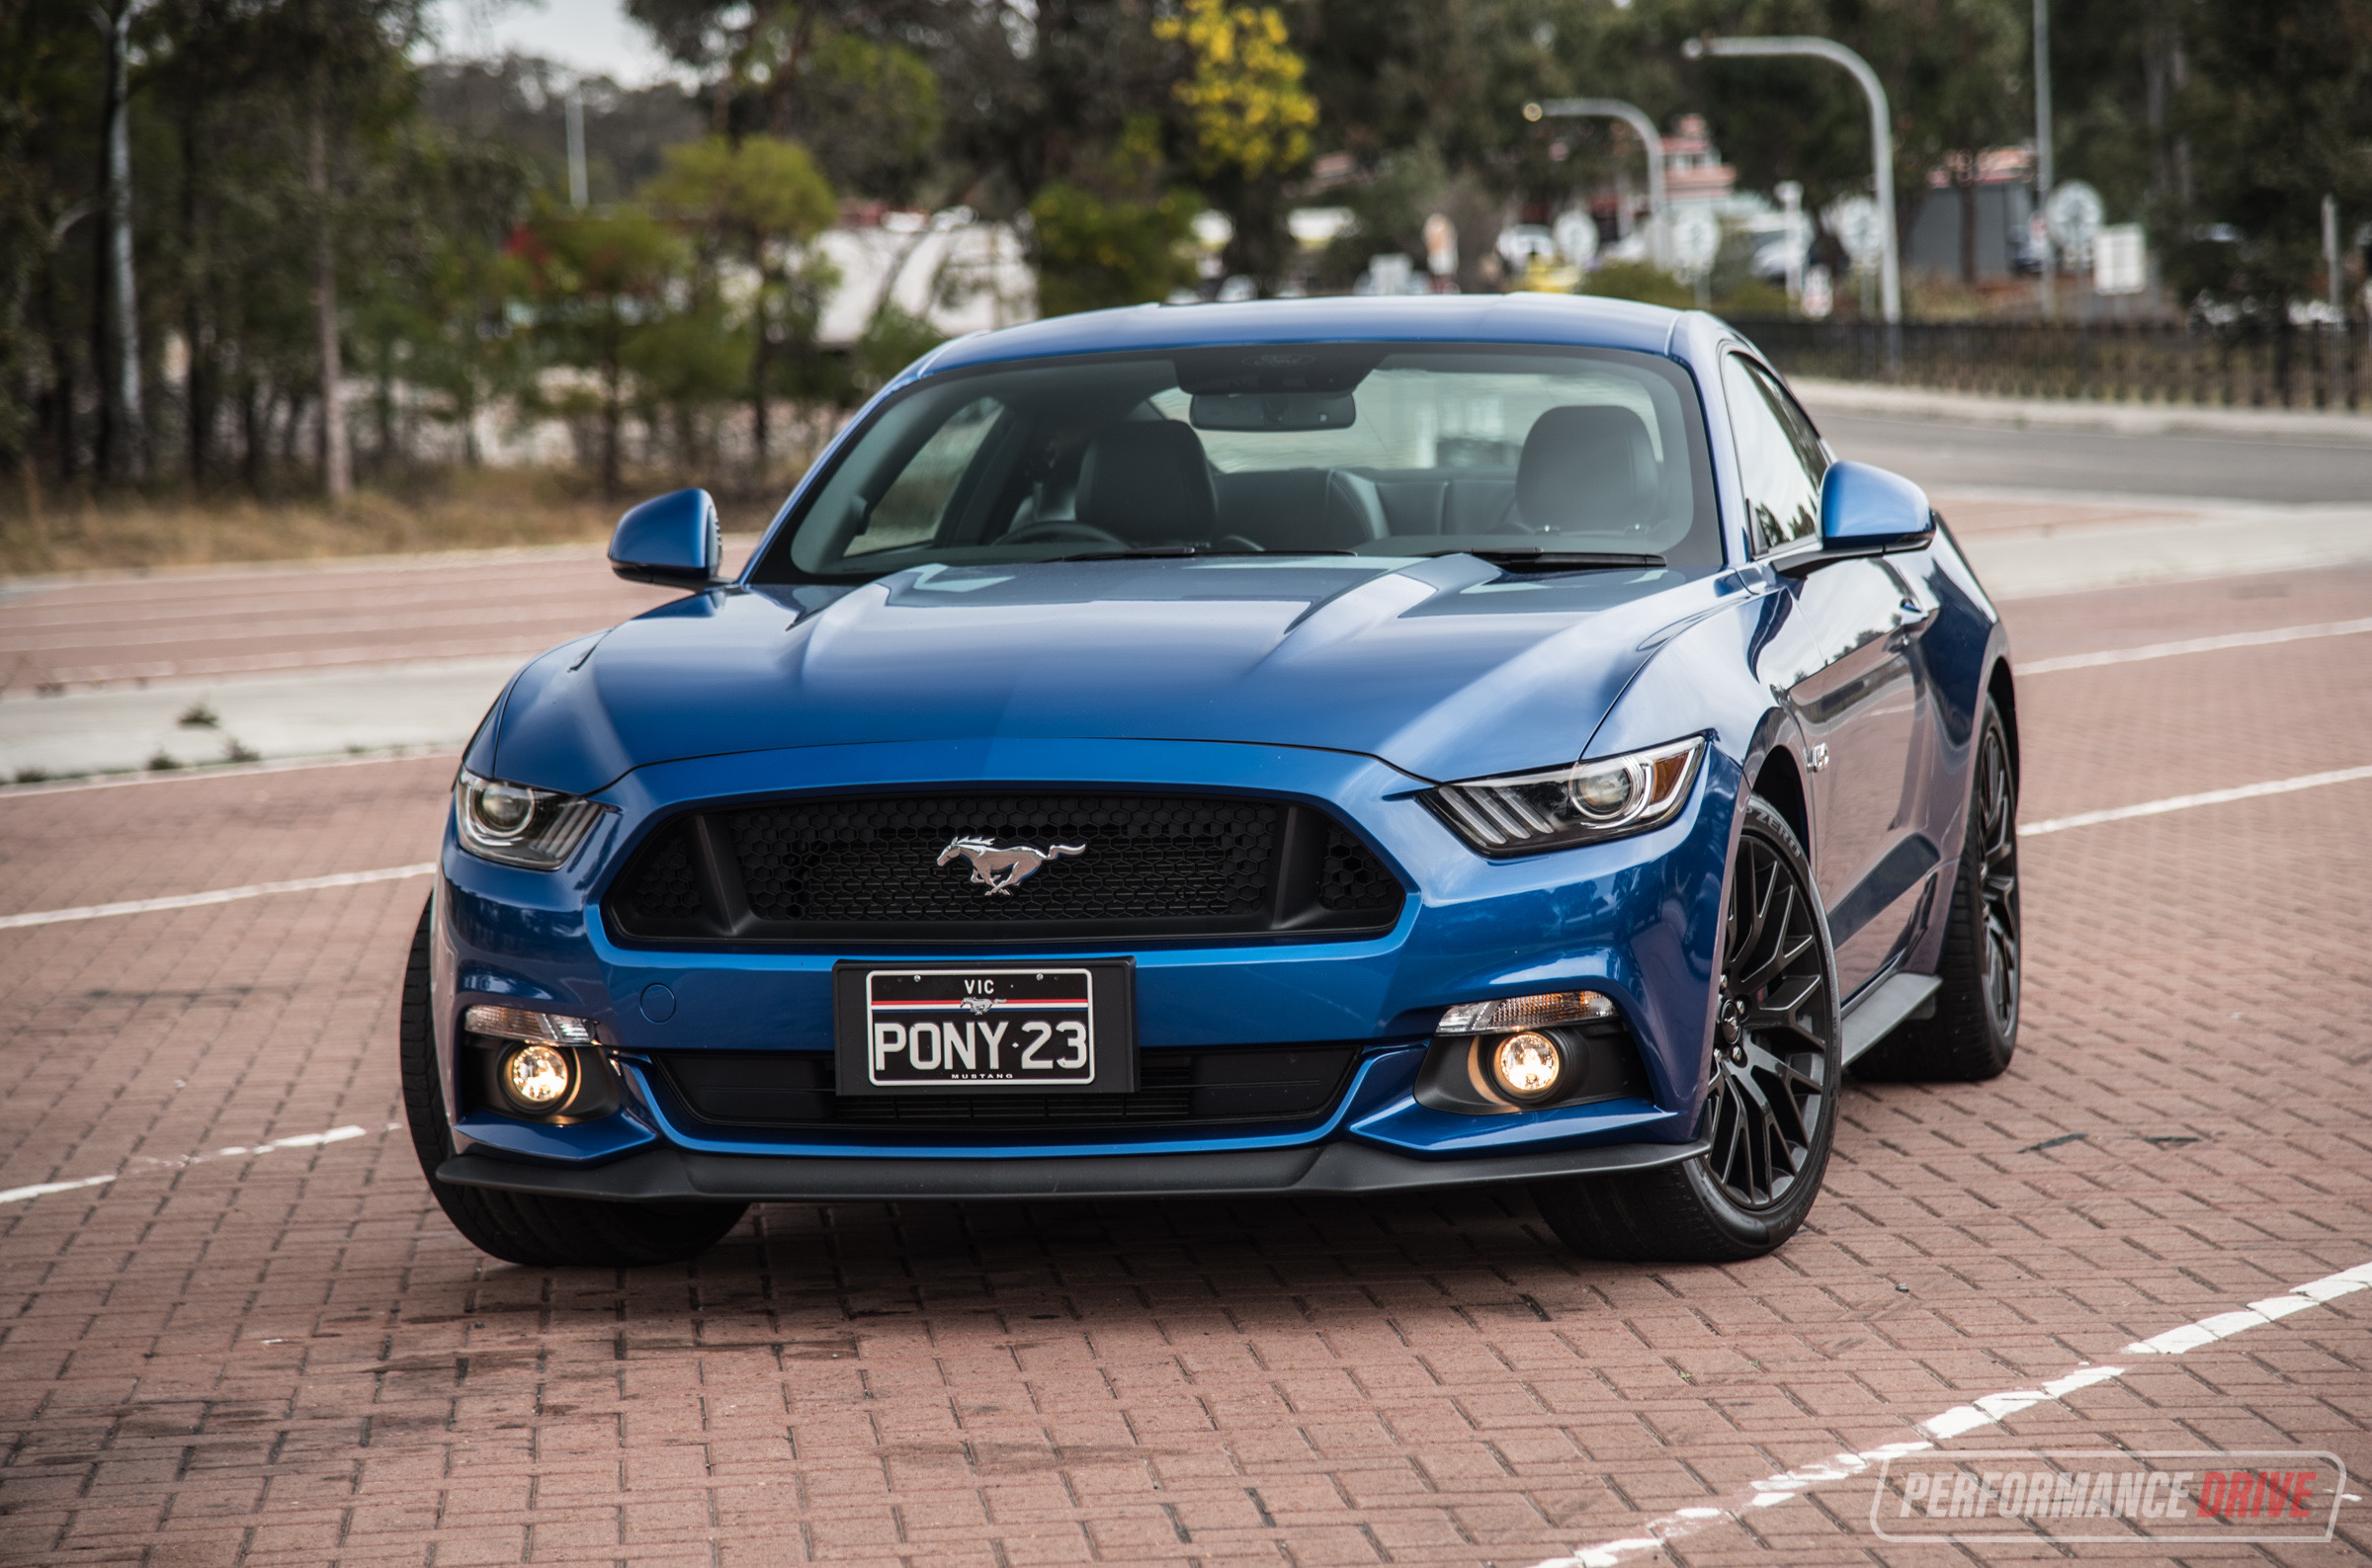 2017 Ford Mustang GT review (video) | PerformanceDrive